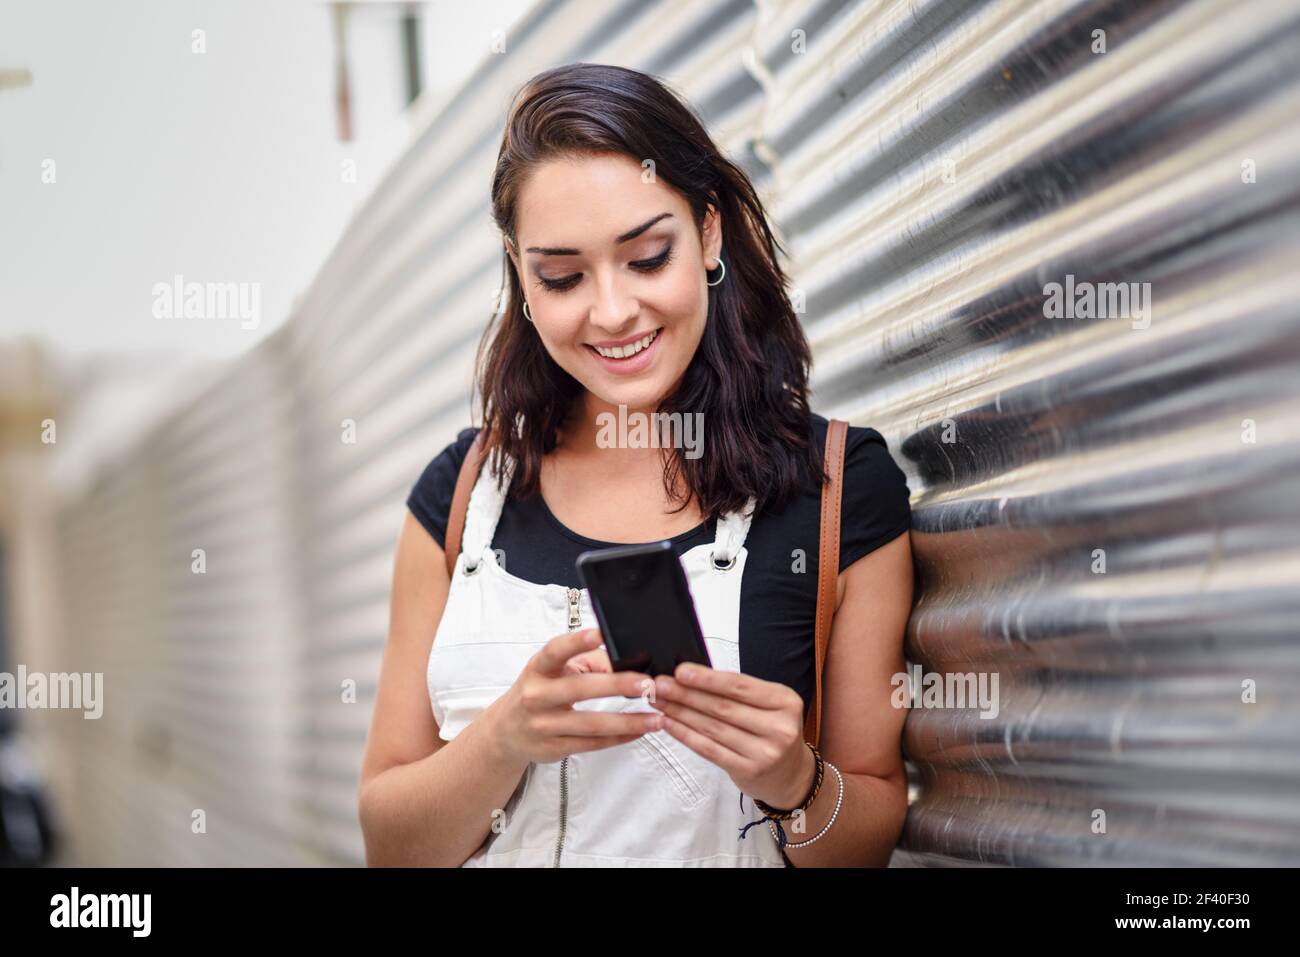 Smiling young woman texting with her smart phone outdoors. Girl wearing denim dress in urban background. Technology concept. Stock Photo